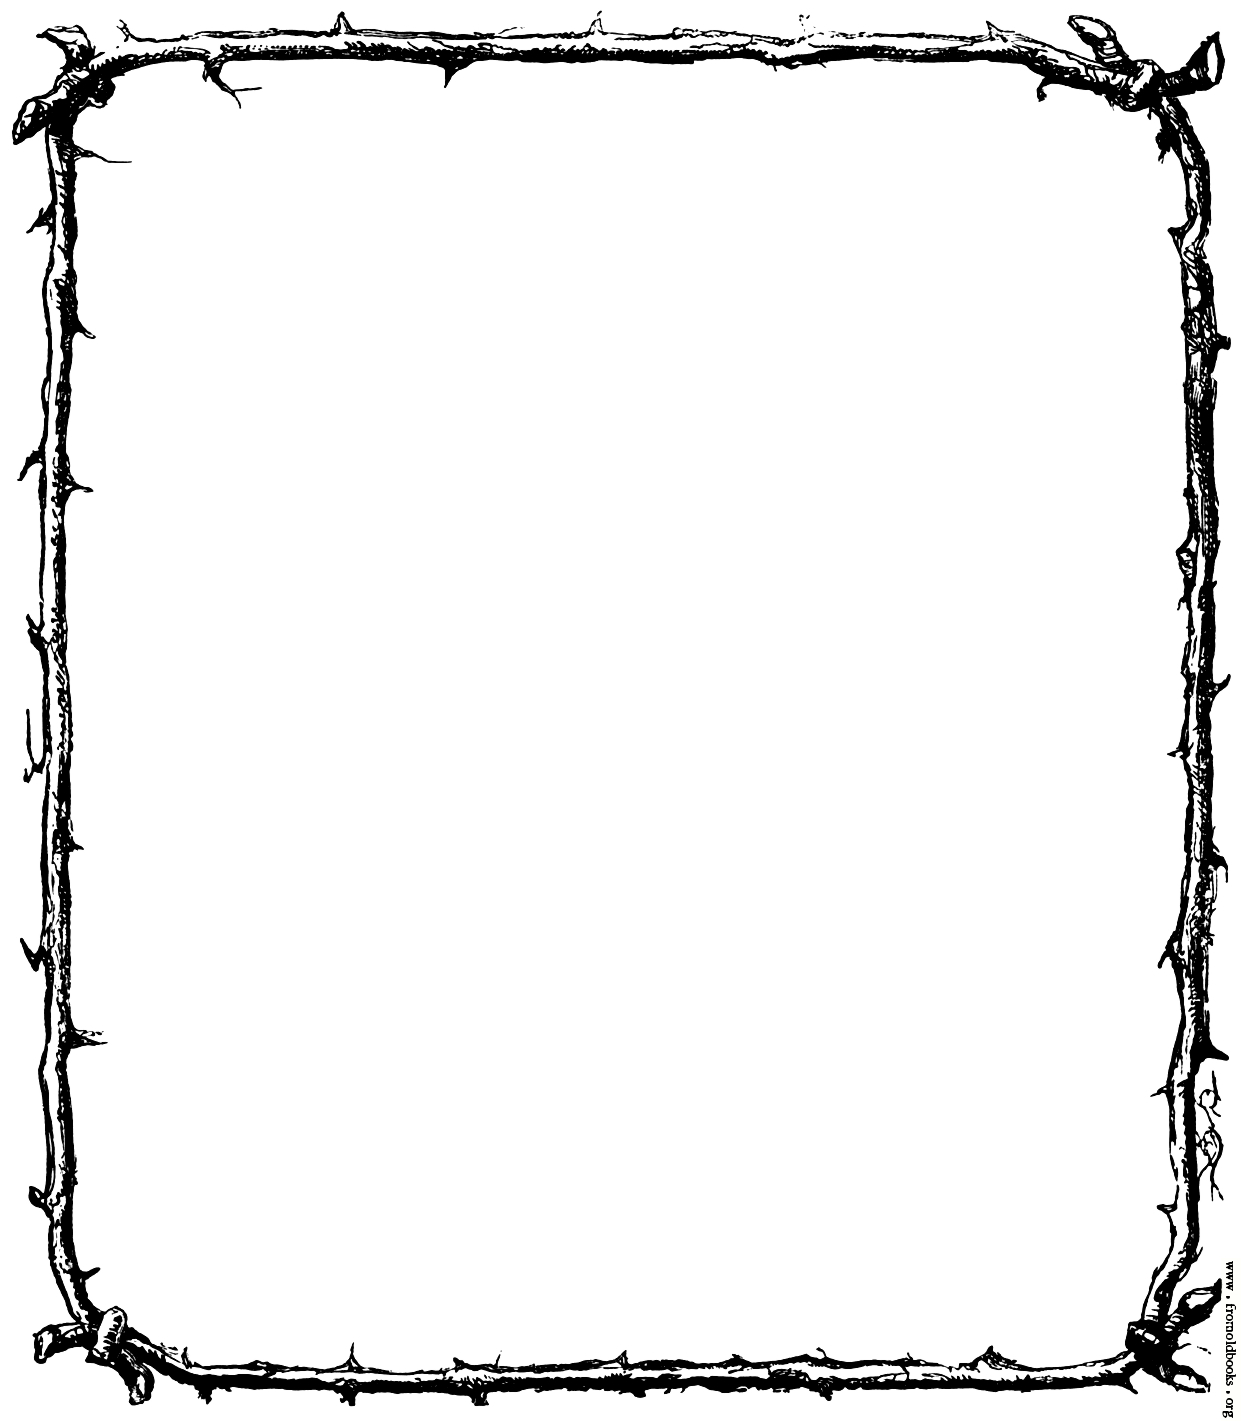 Clip Arts Related To : border clipart vintage png. 